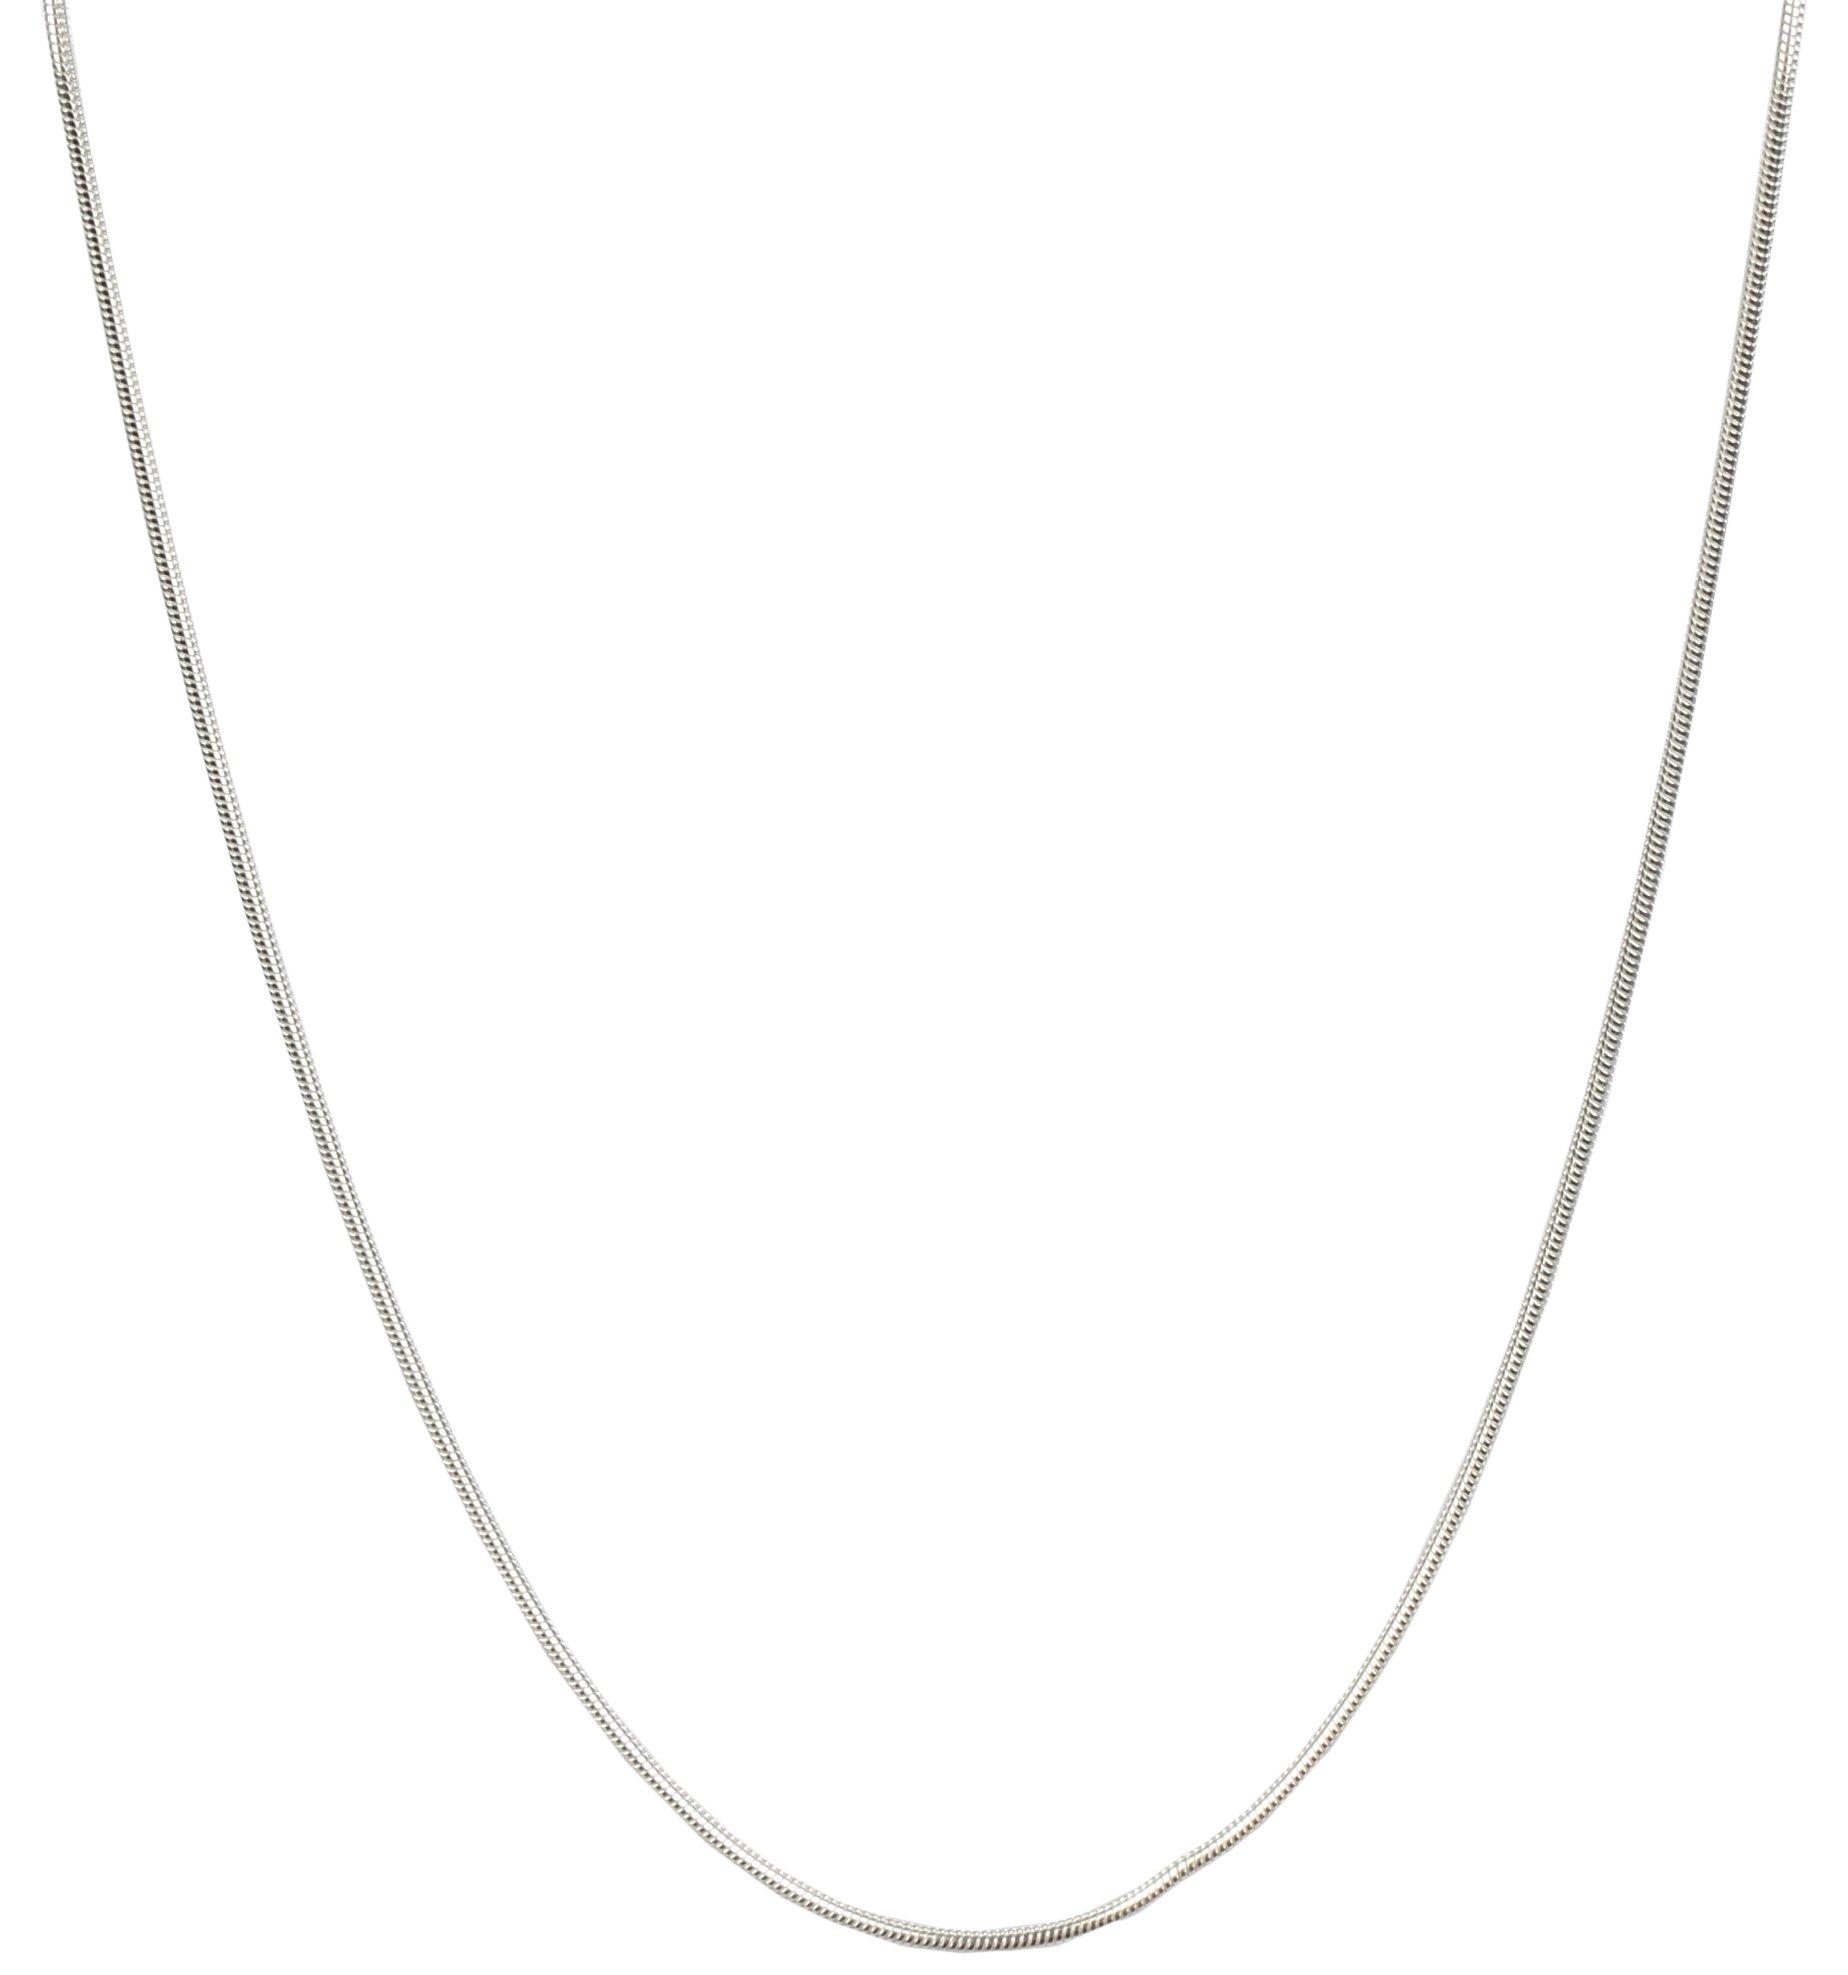 Piper & Taylor Silver Tone Snake Chain Necklace